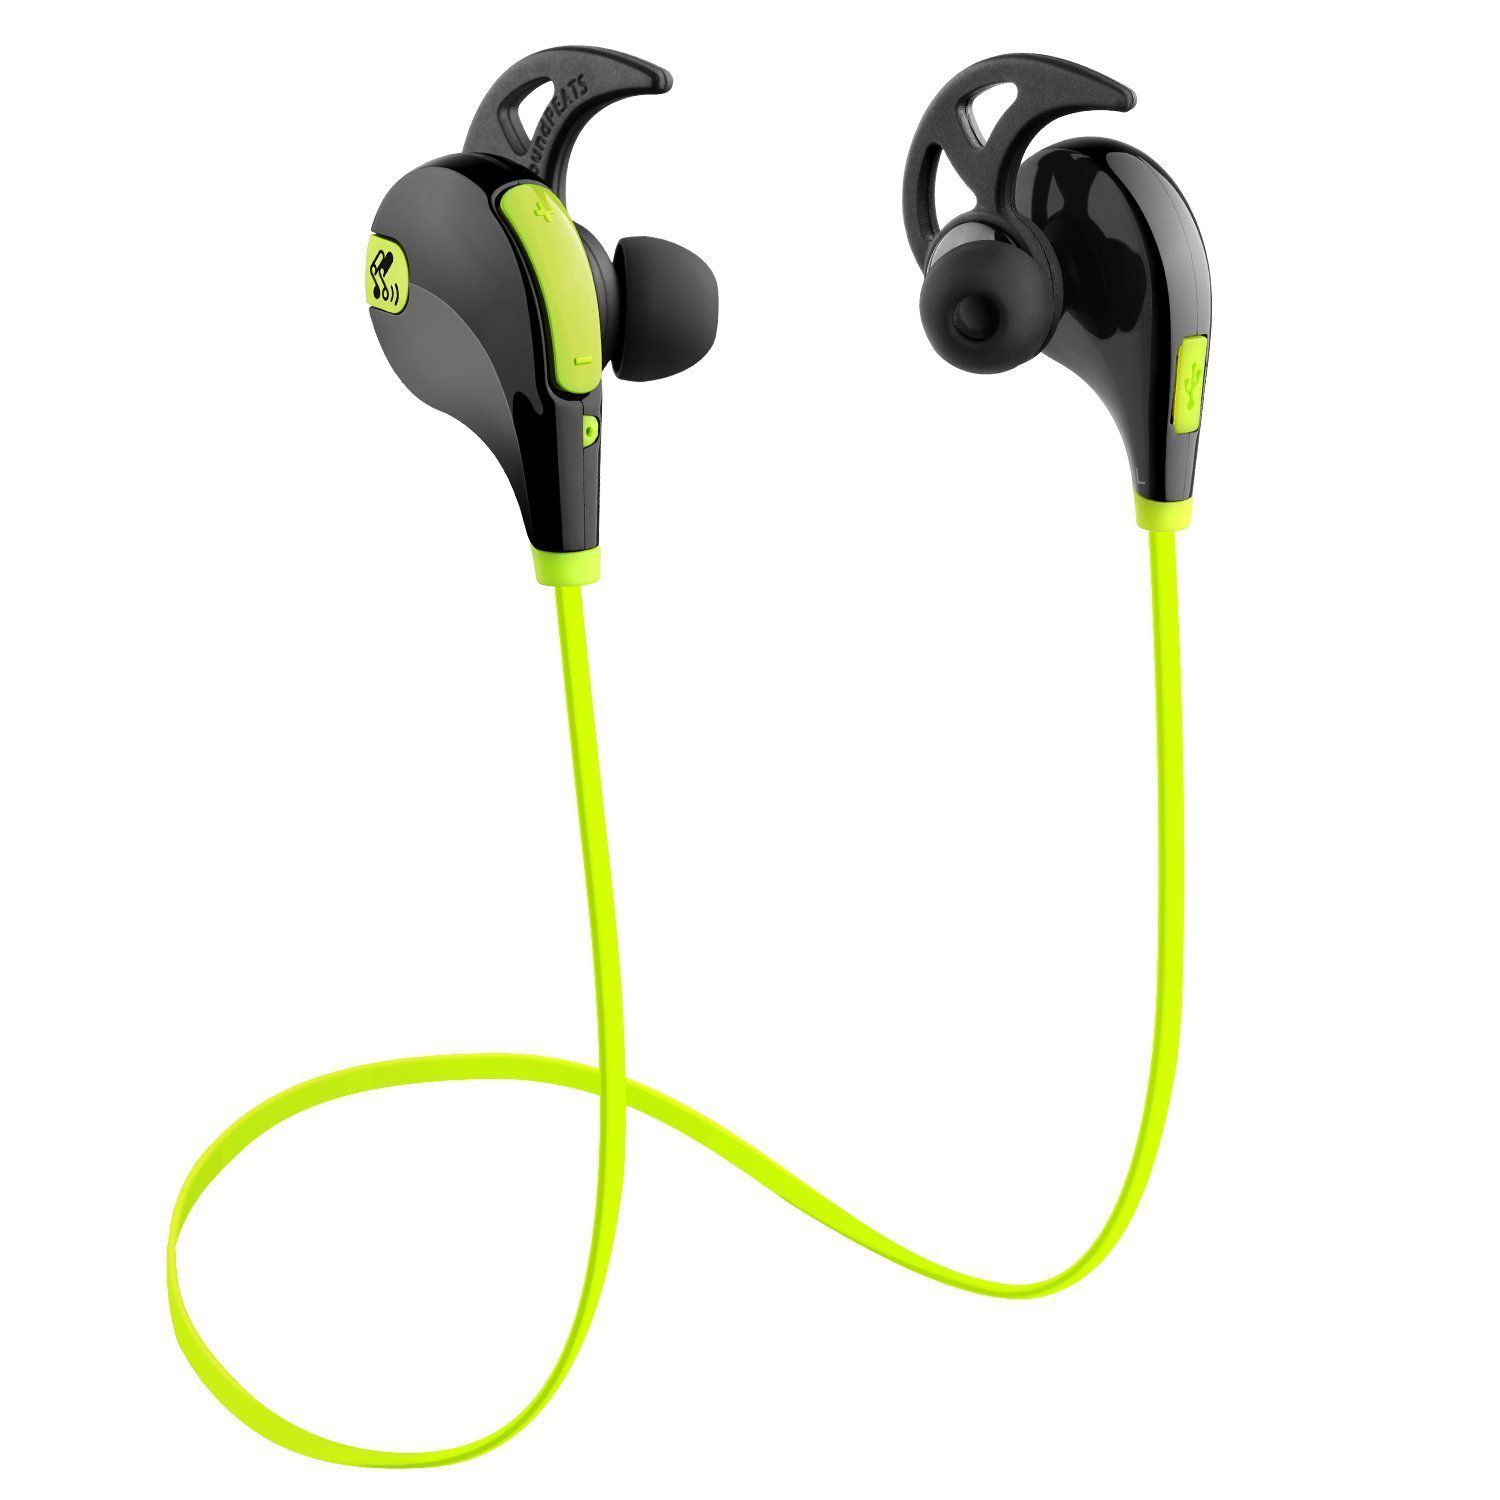 Go Mantra Asus P535 Bluetooth Headset Green Bluetooth Headsets Online At Low Prices Snapdeal India